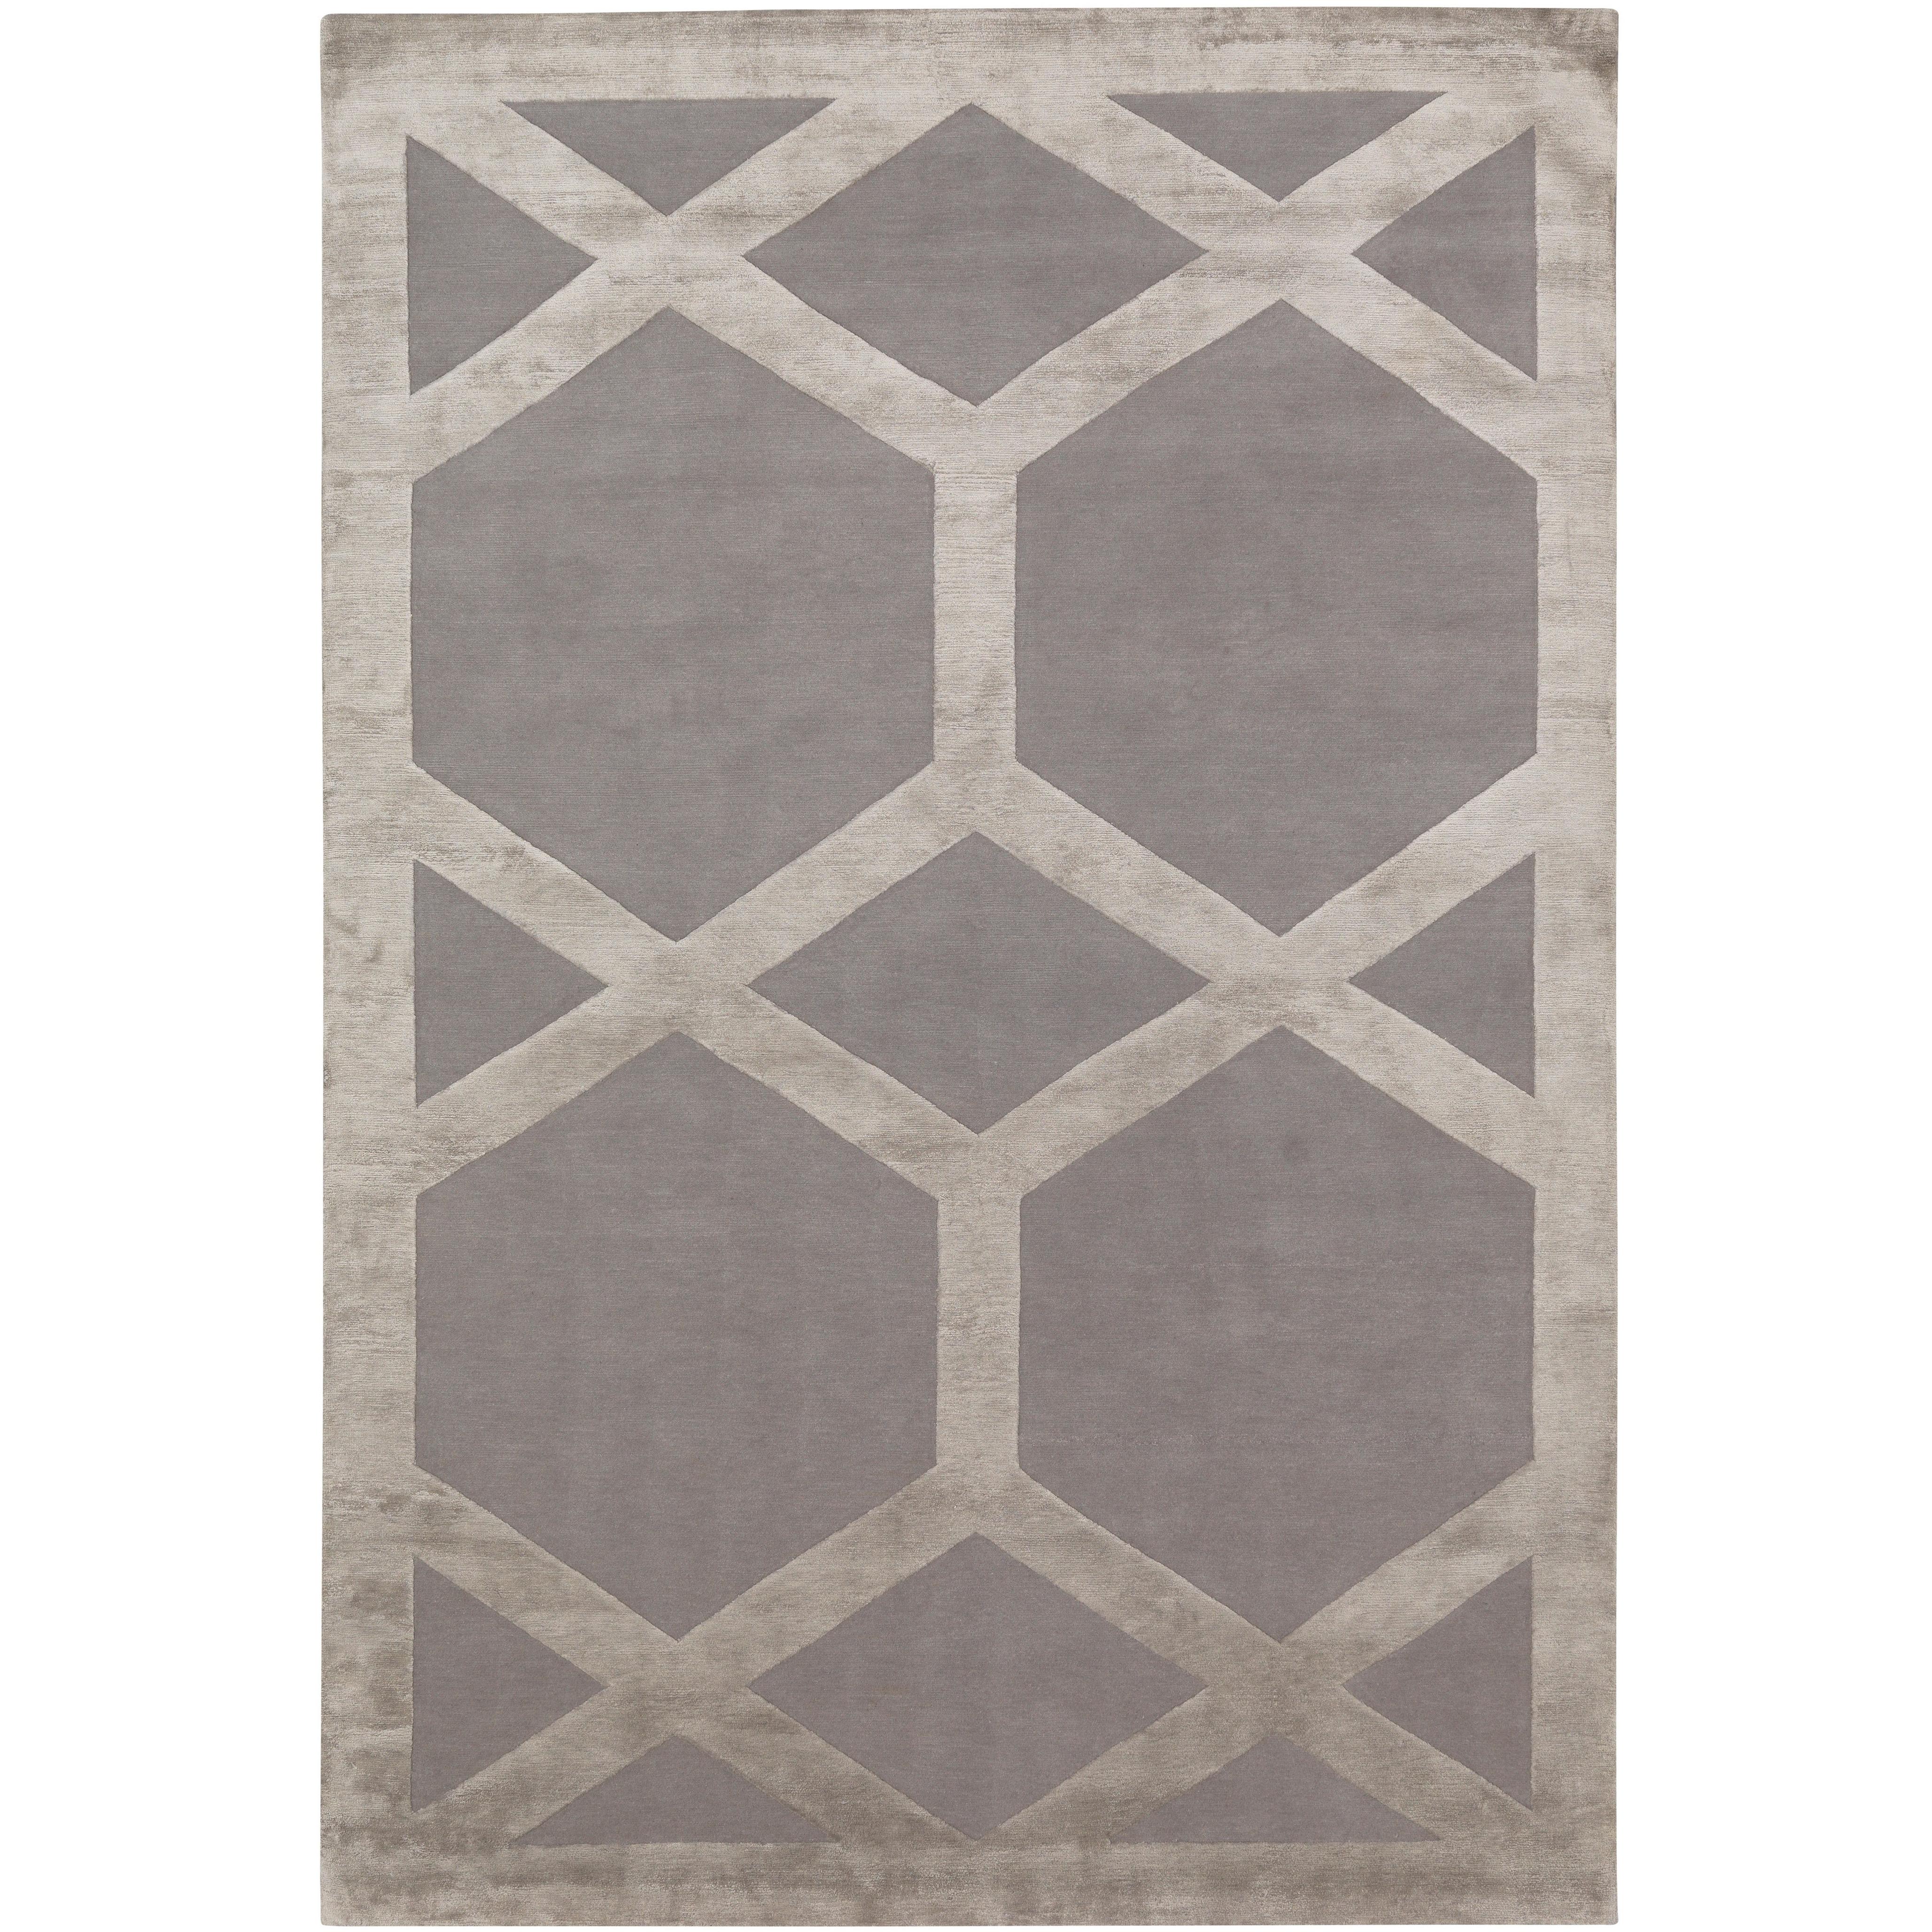 Cora Hand-Knotted 10x8 Rug in Wool and Silk by Suzanne Sharp